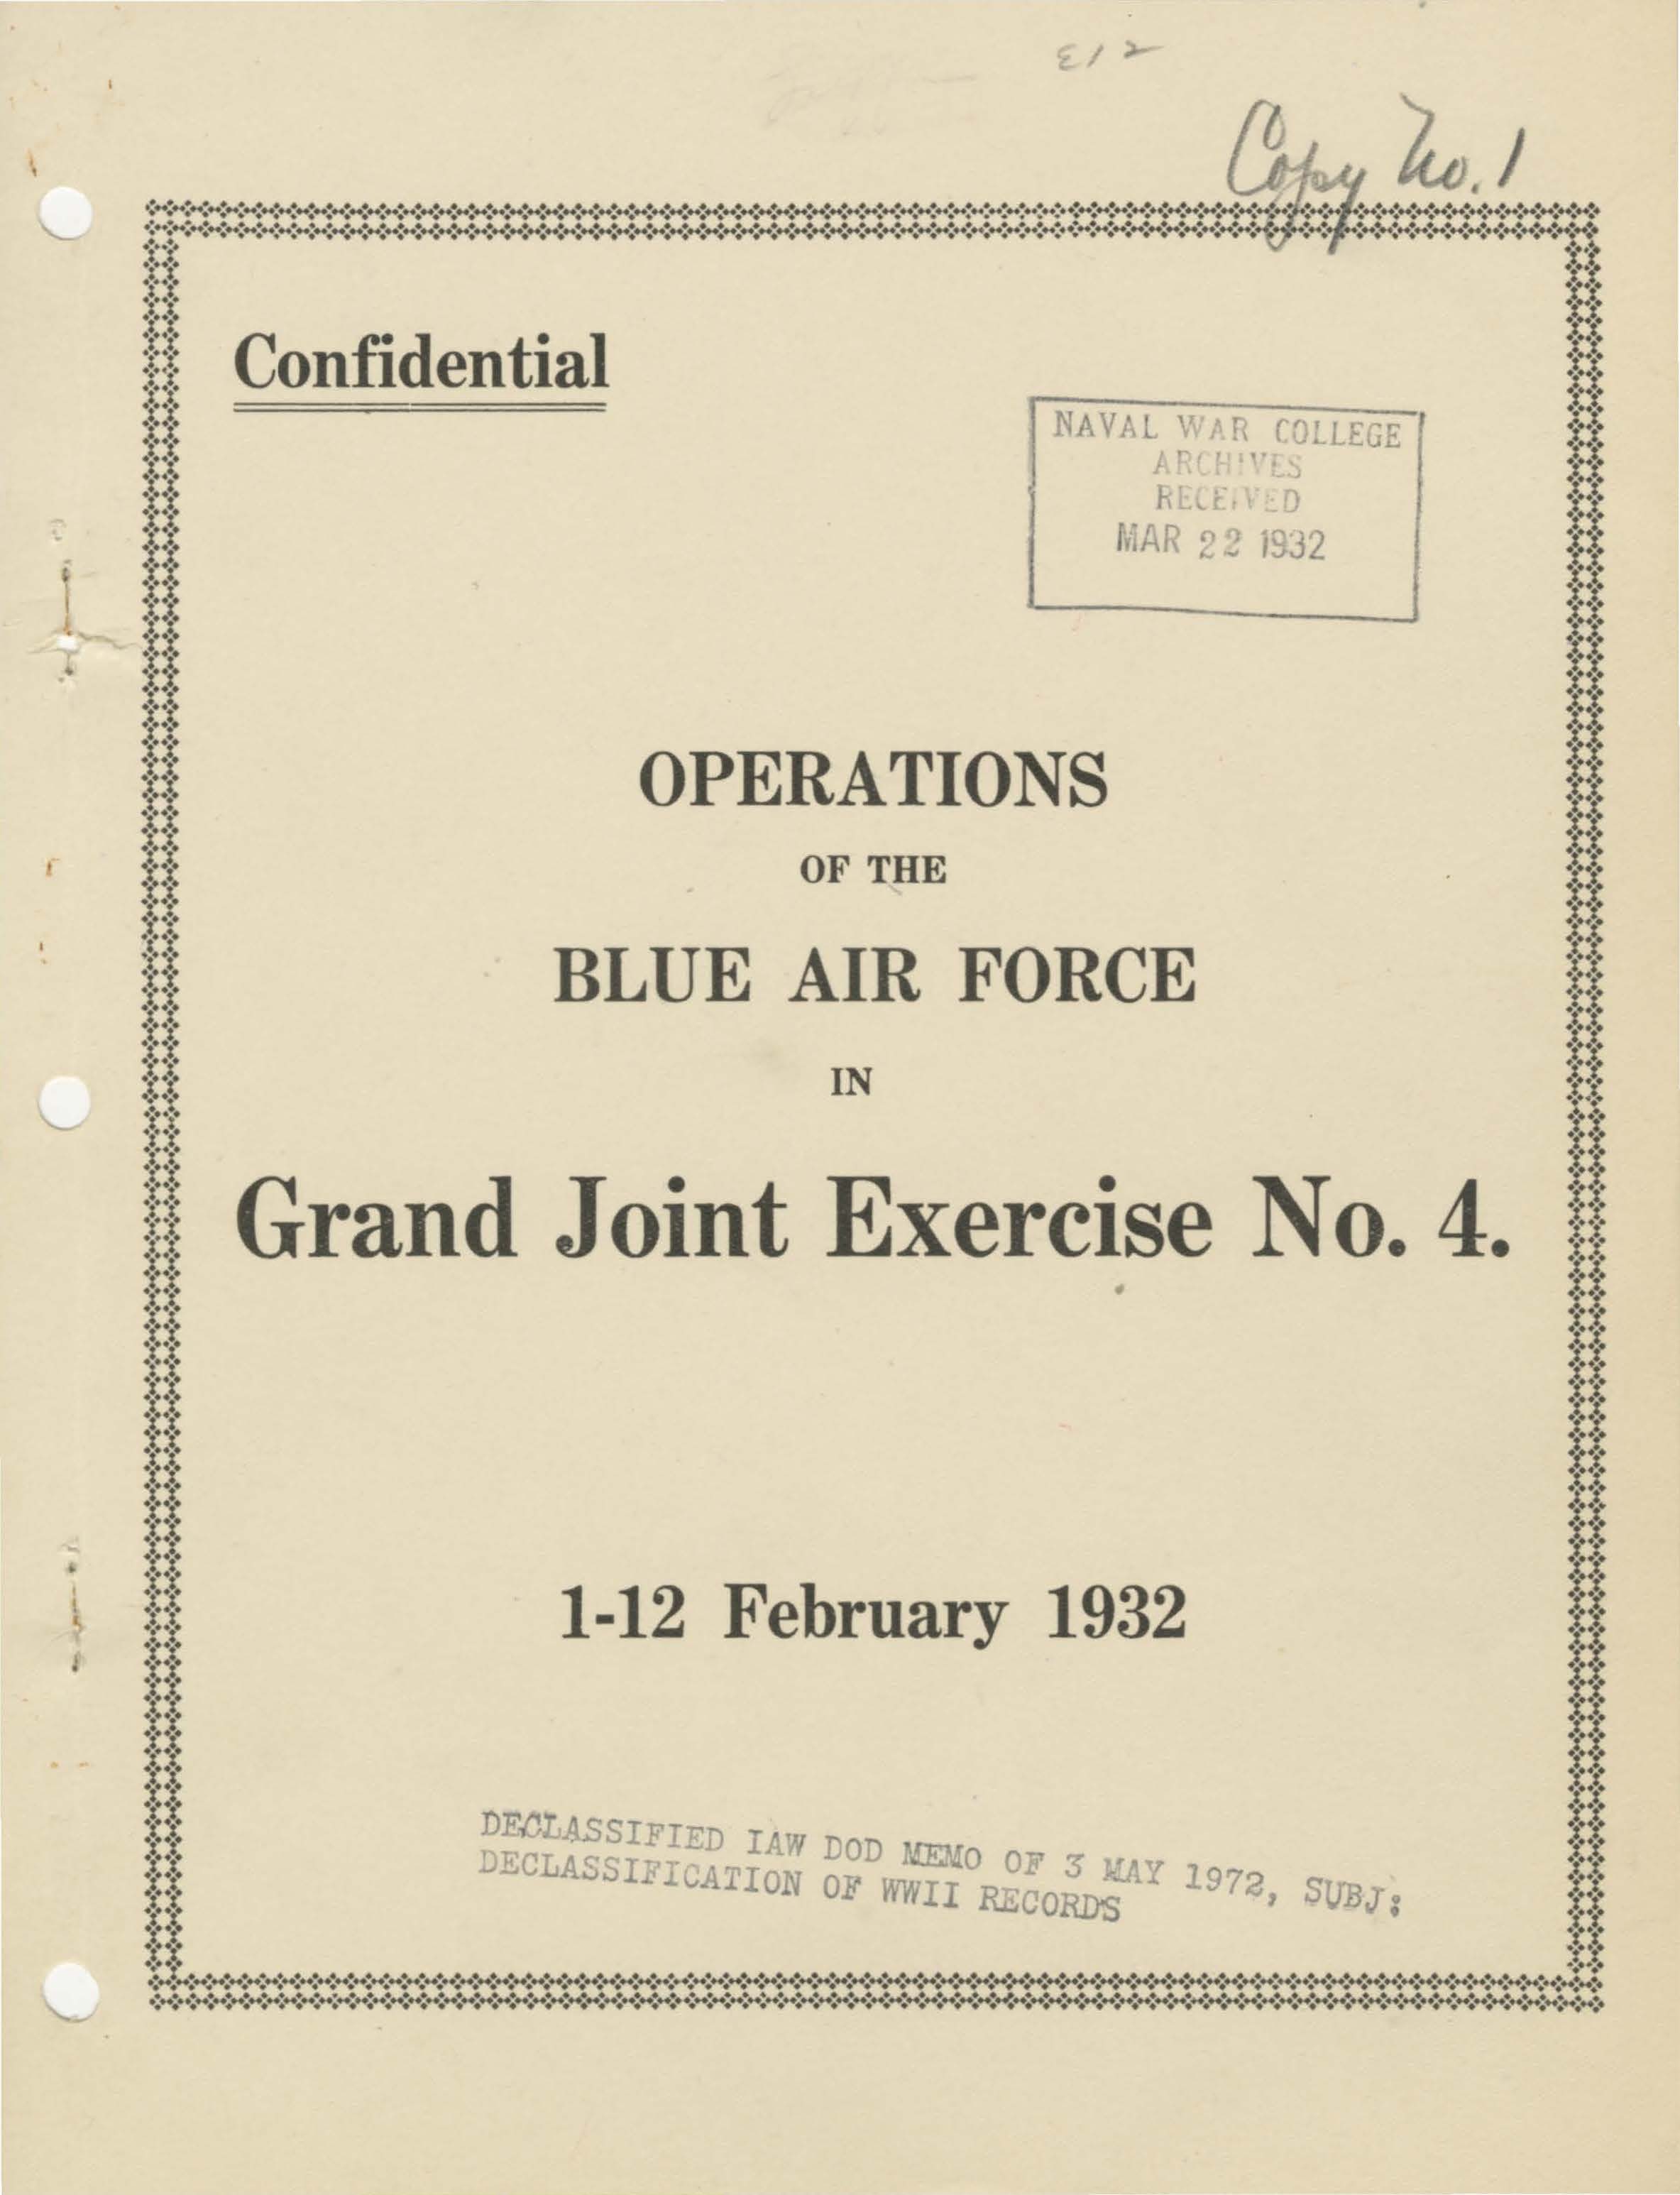 Operations of the Blue Air Force in Grand Joint Exercise No. 4